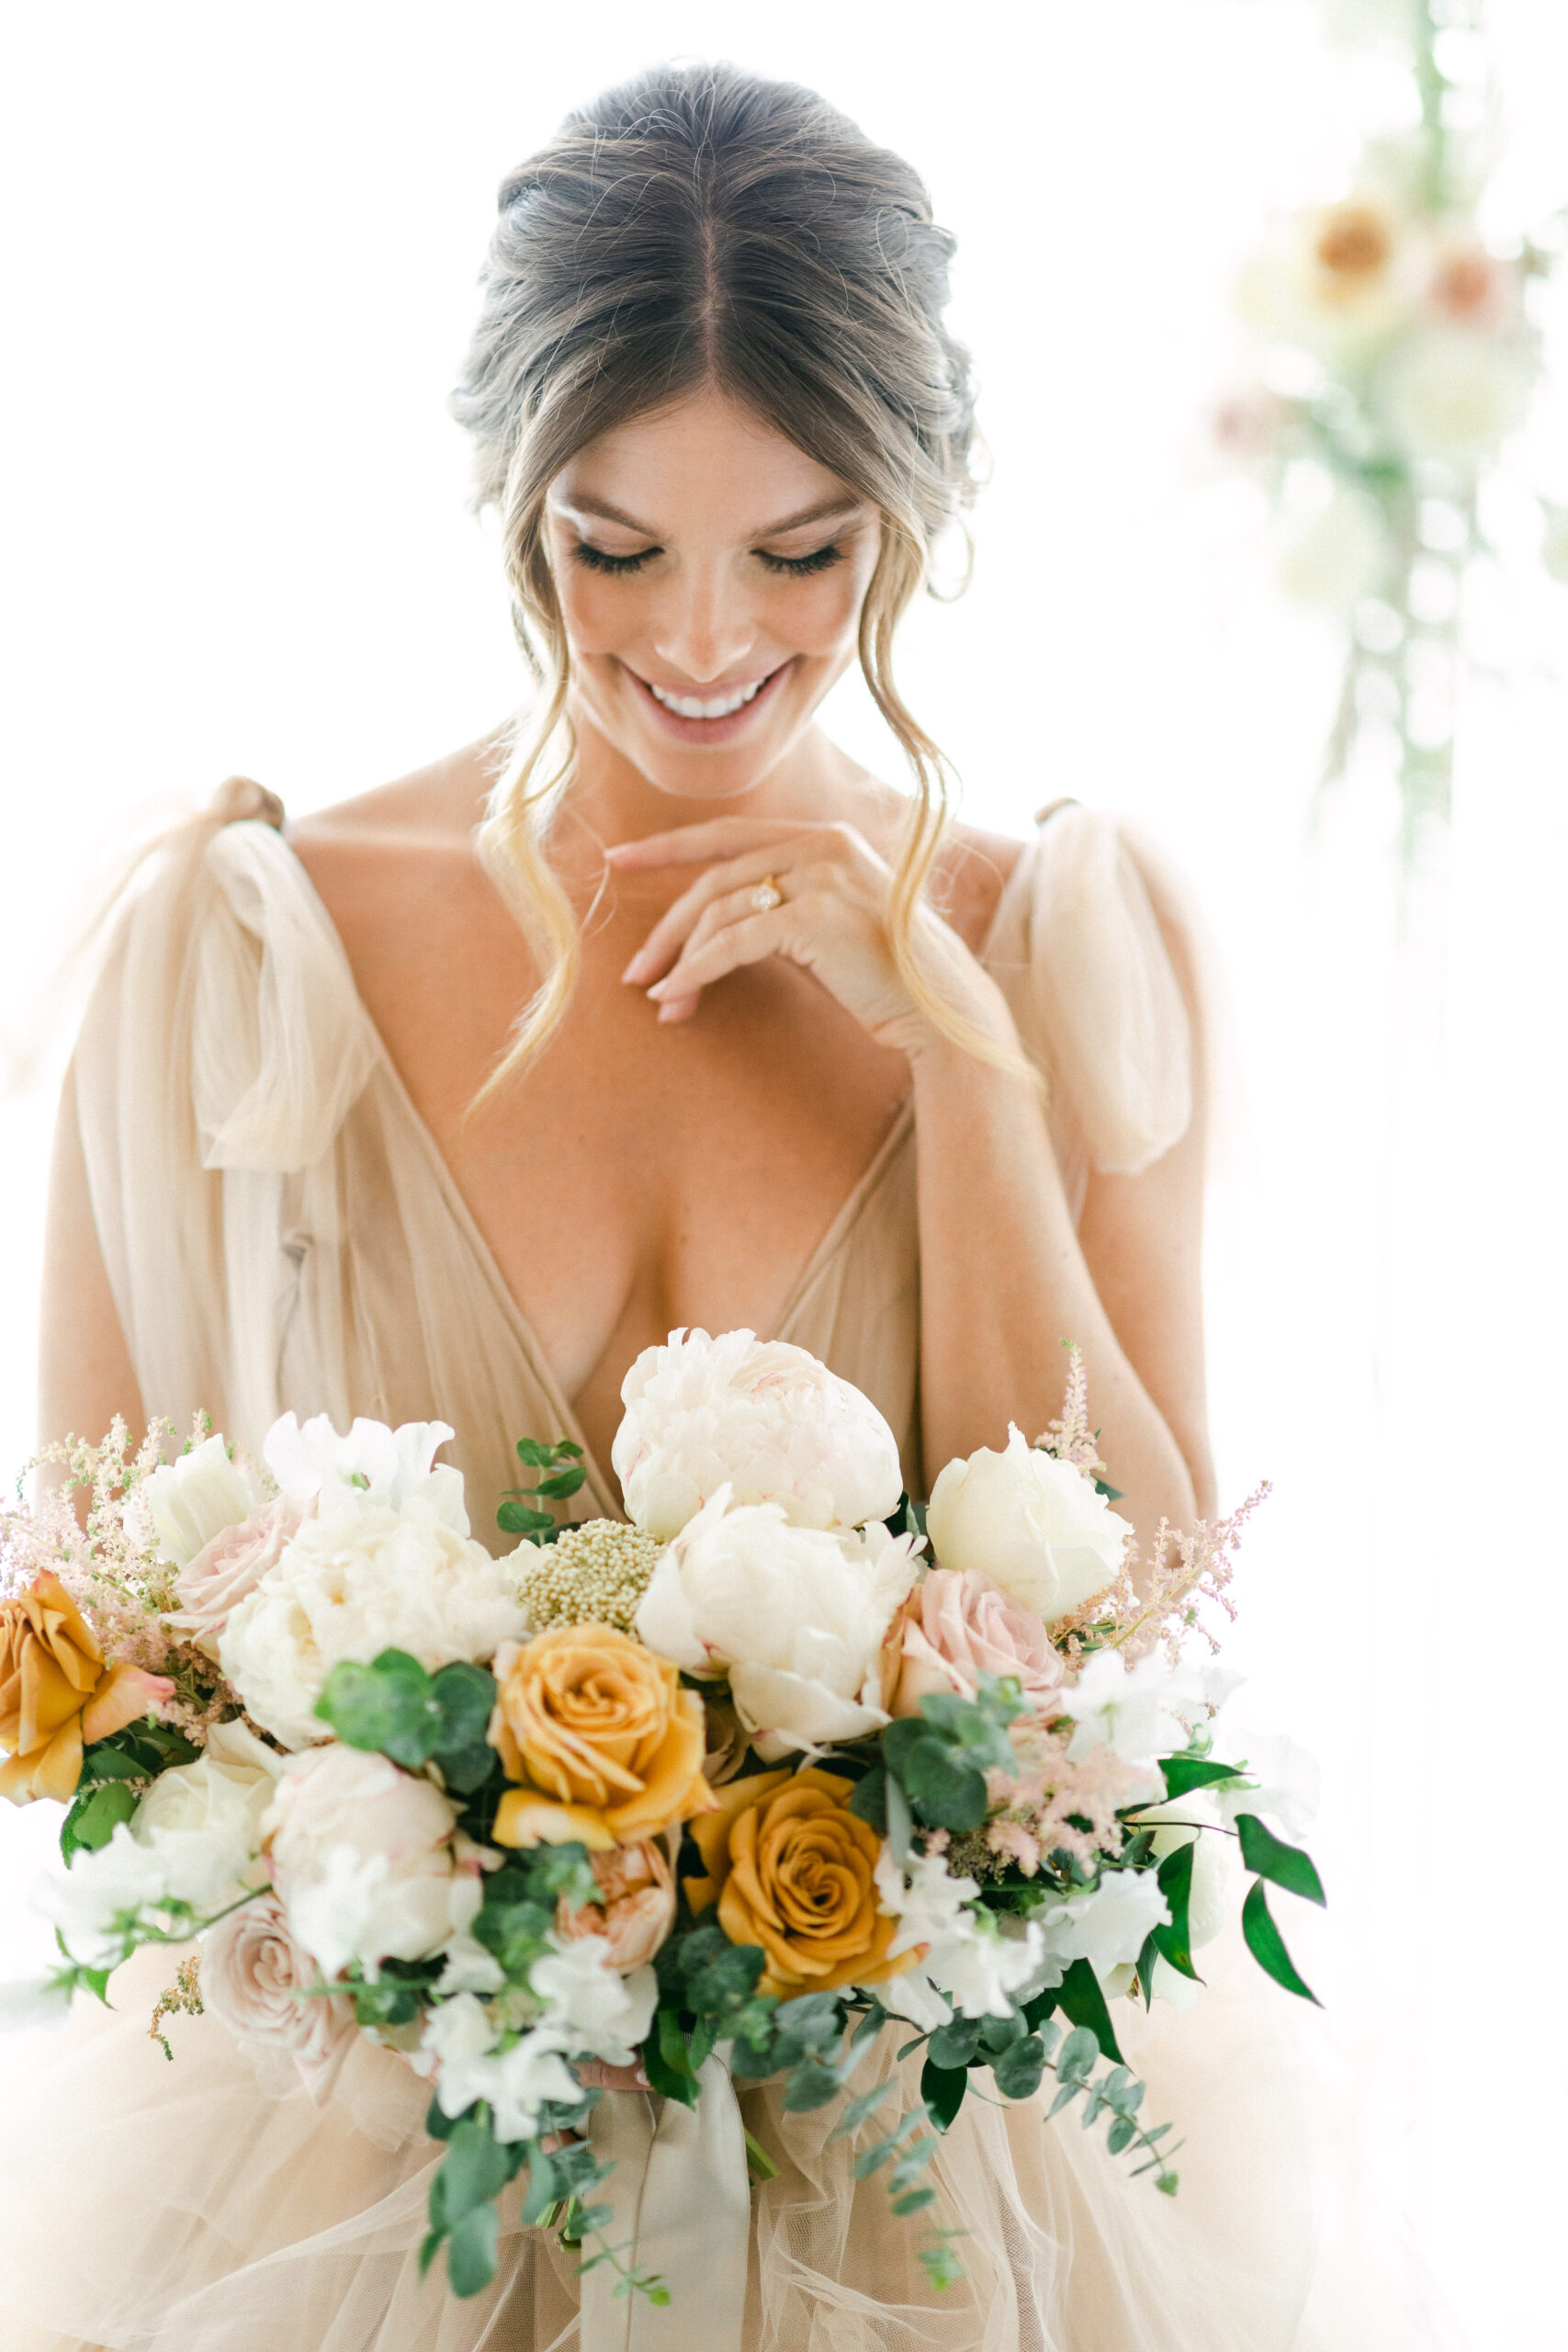 Blonde bride holding a neutral bouquet with white and tan flowers